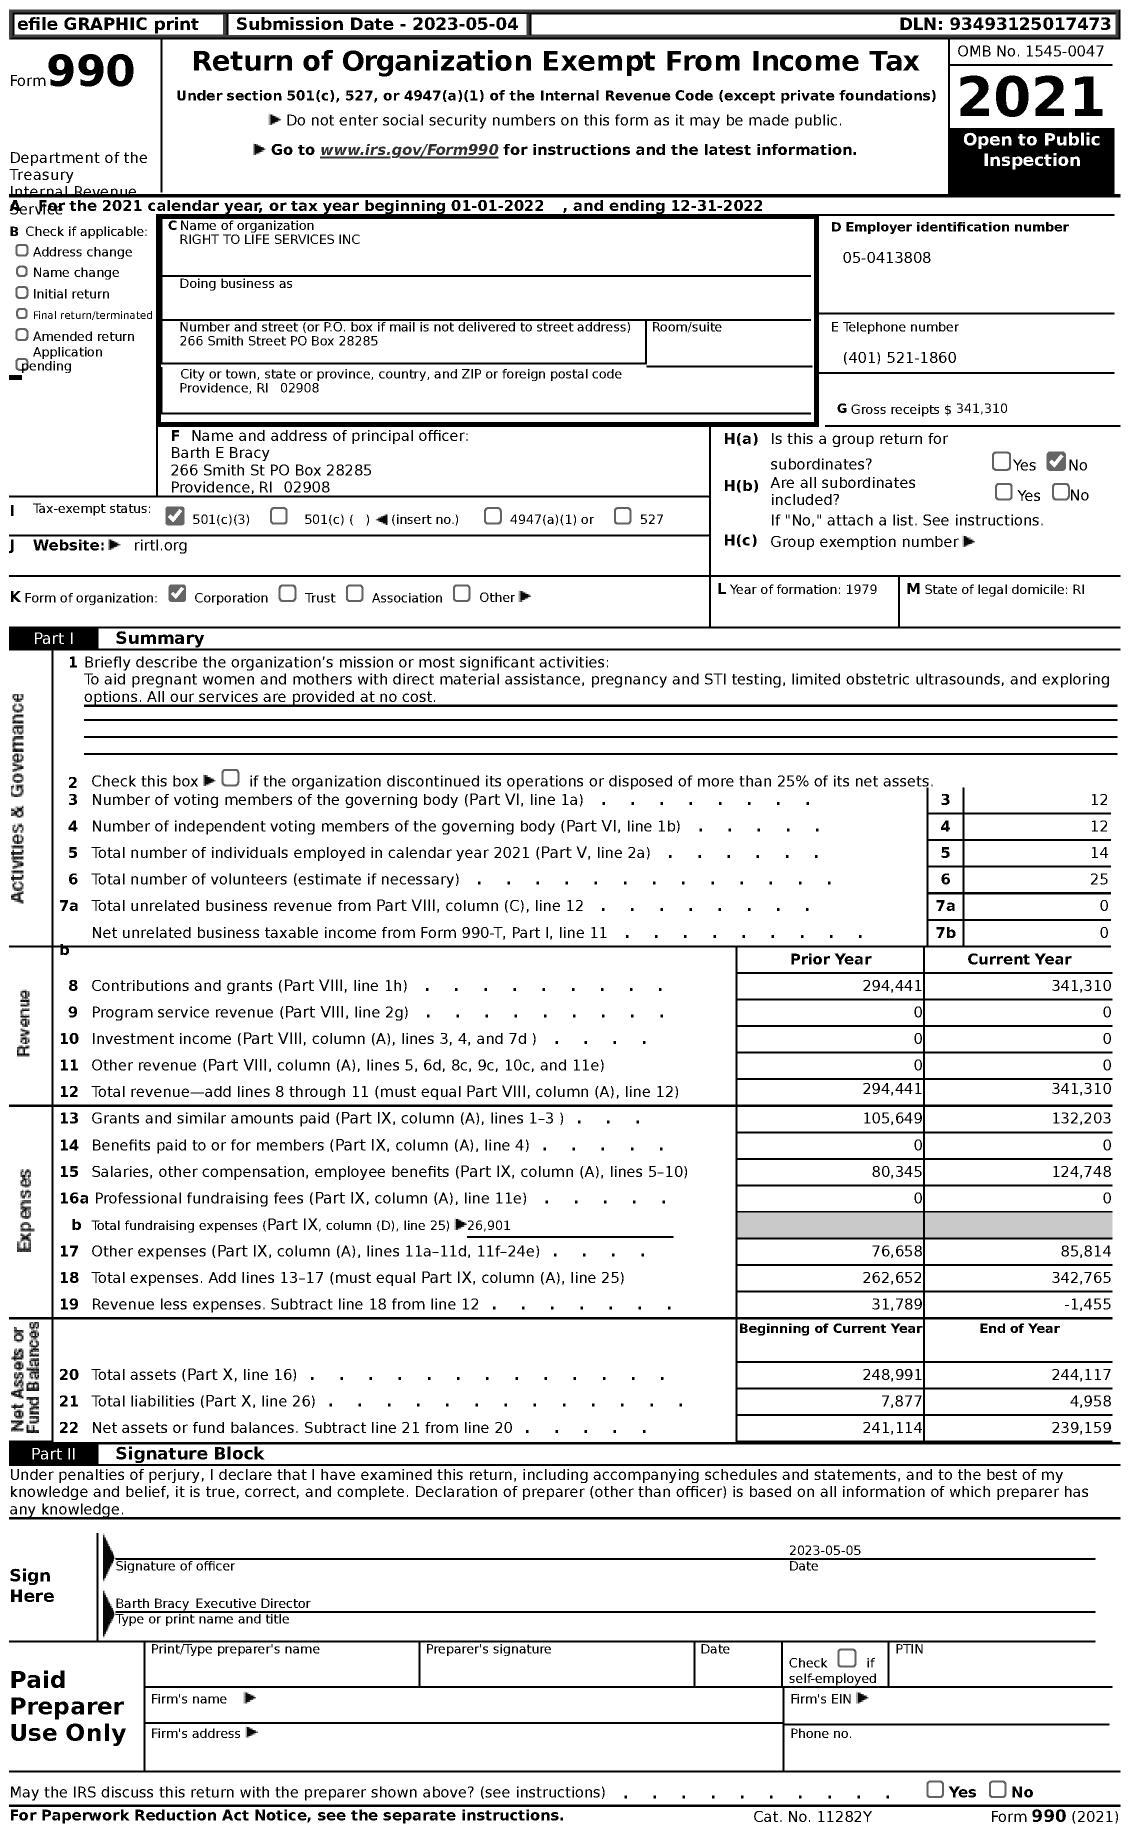 Image of first page of 2022 Form 990 for Right to Life Services